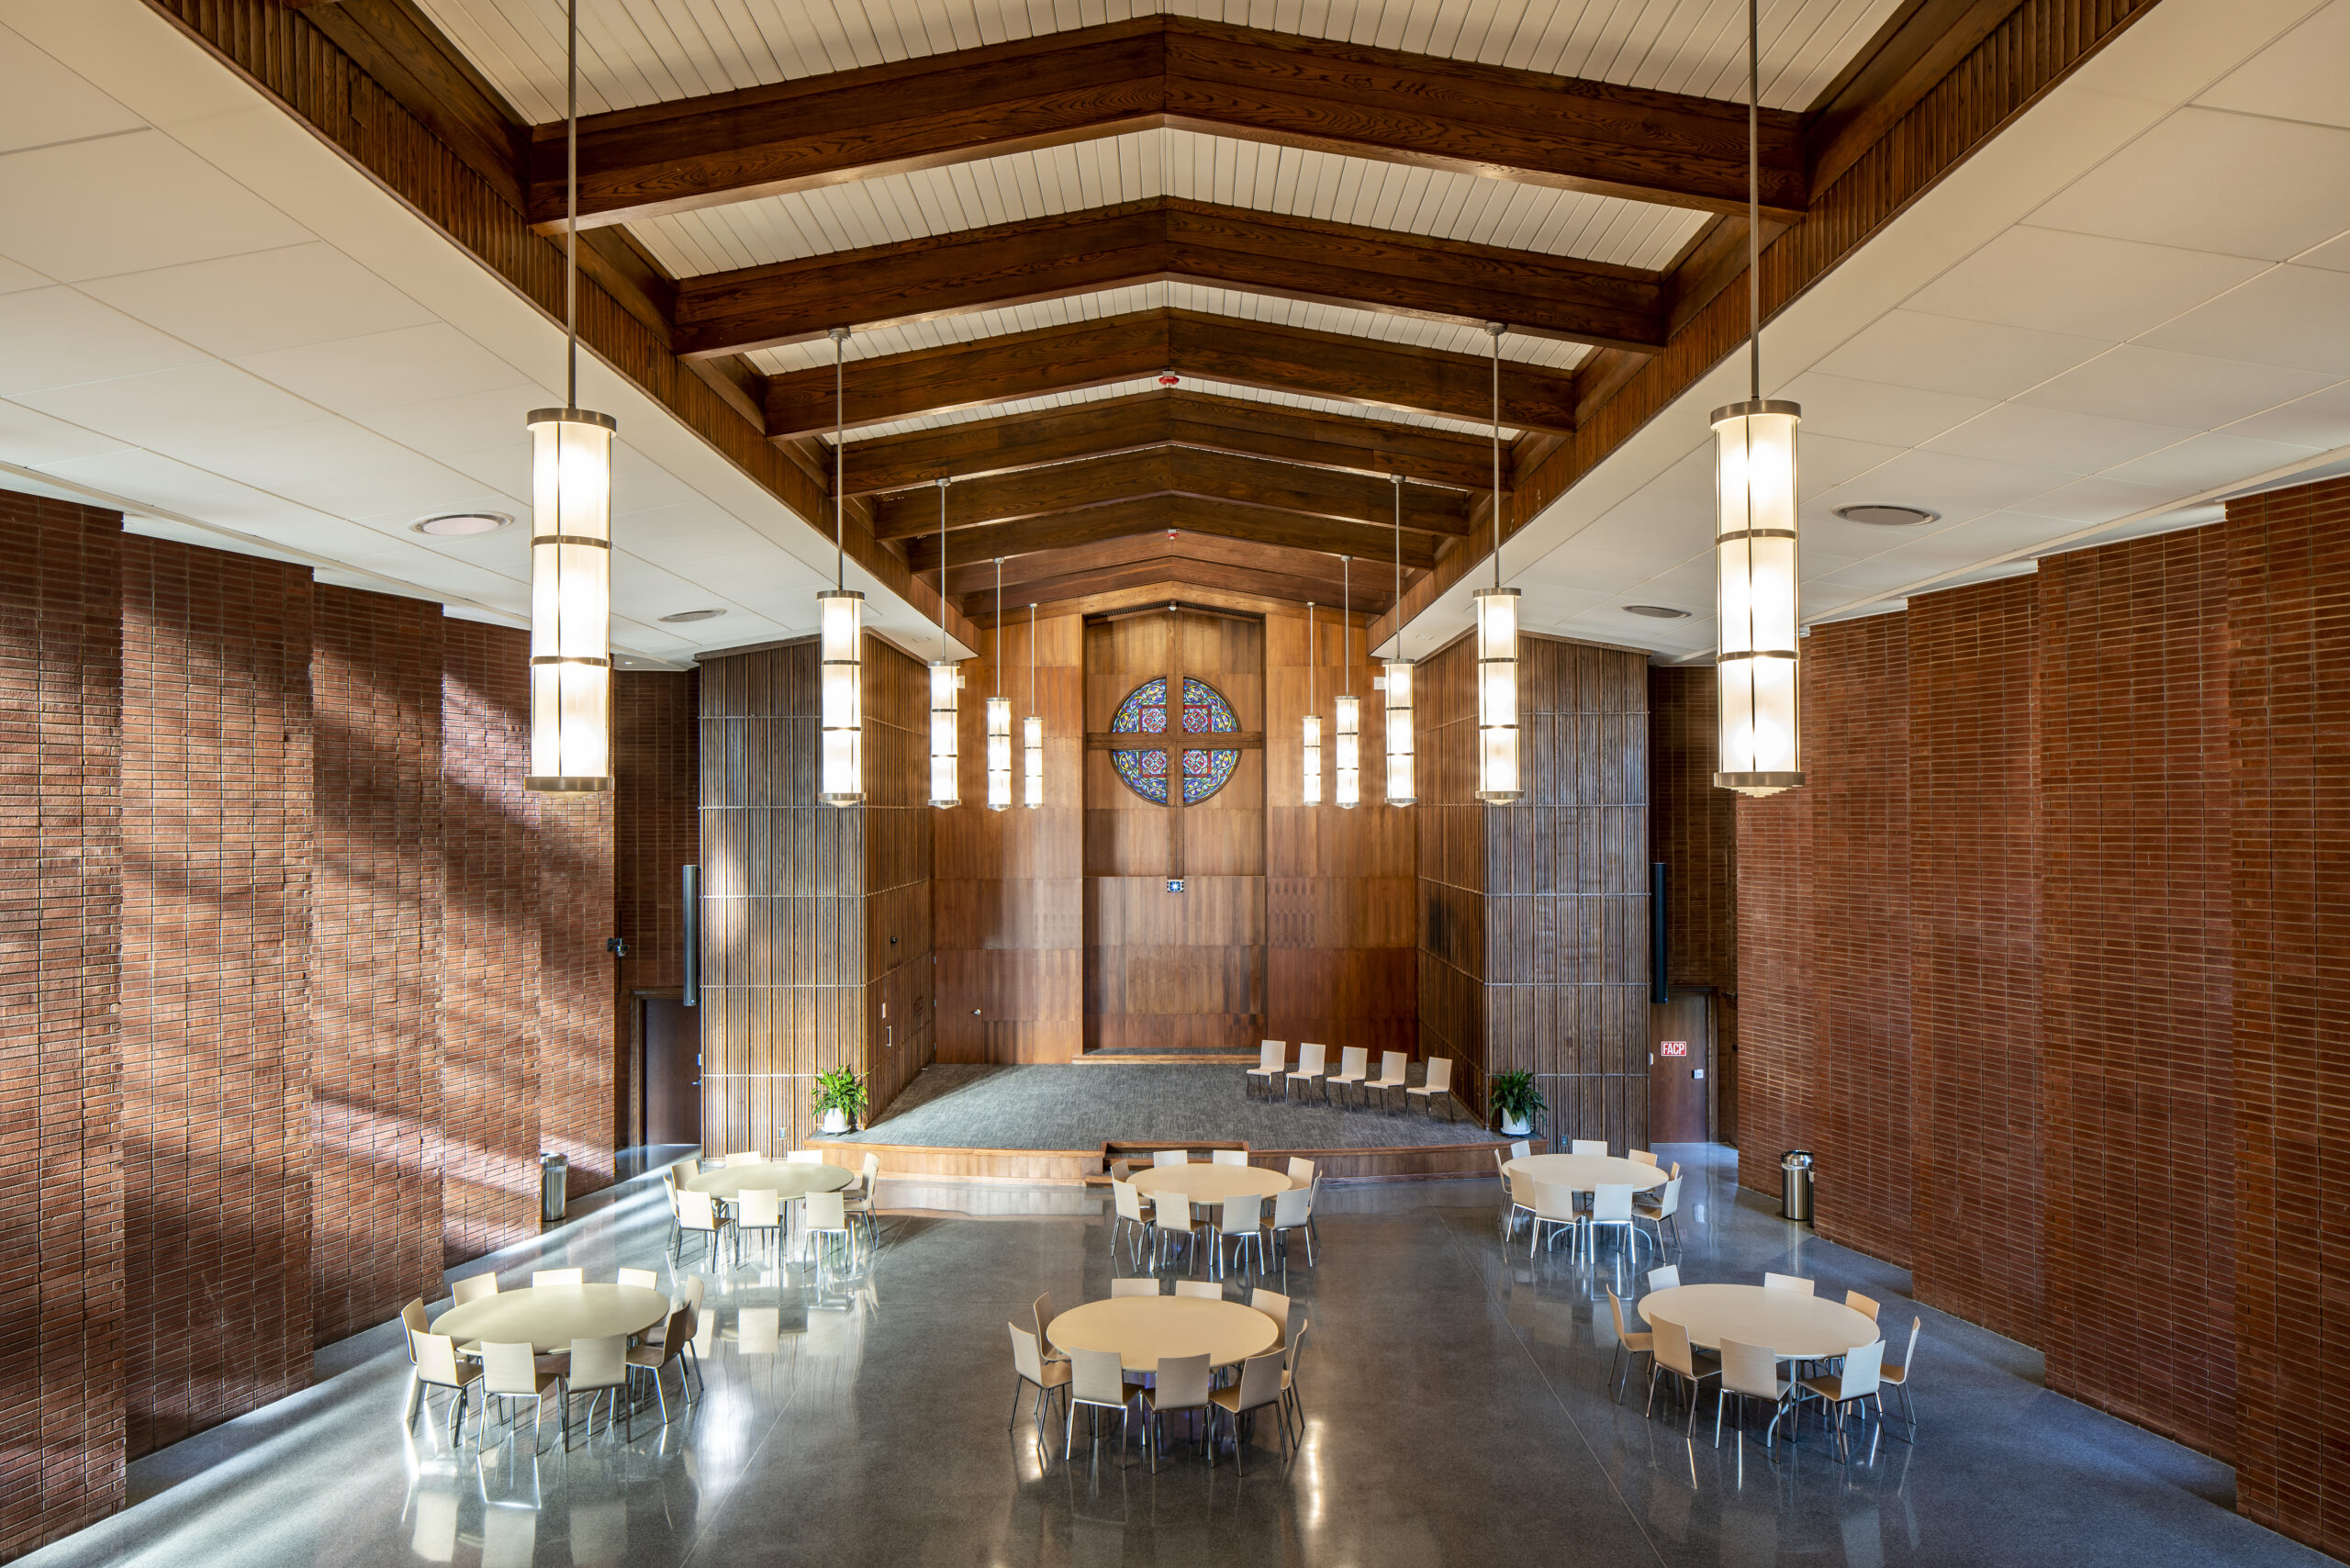 Greg Poole, Jr. All Faiths Chapel Nave Looking into Chancel with Tables and Chairs for Event